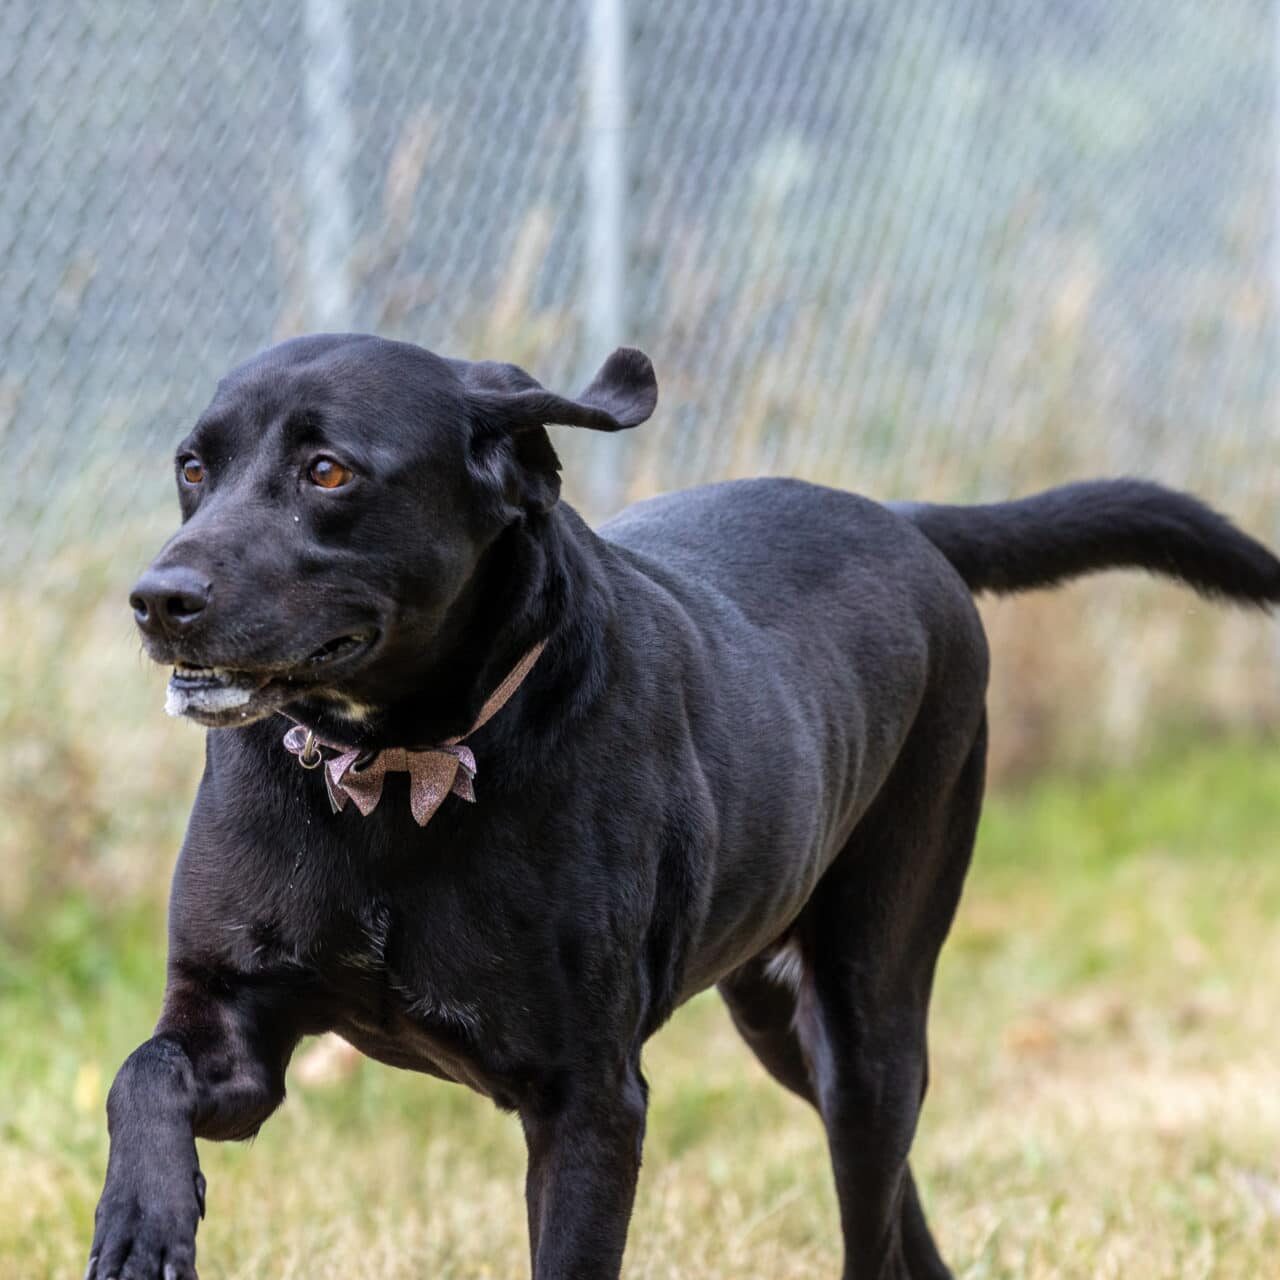 Black Lab Dog running in a screened in area outside